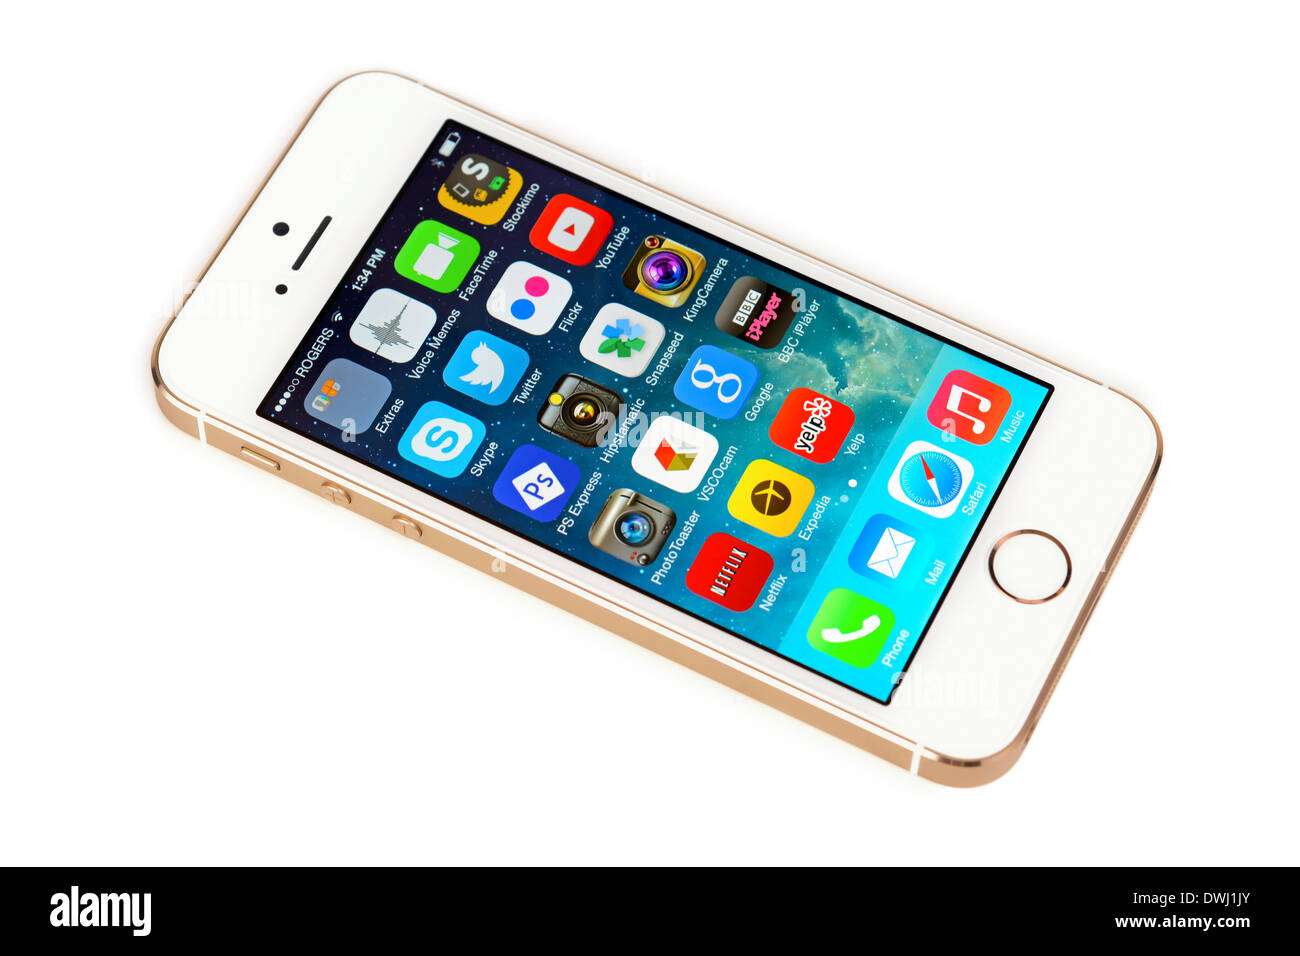 iphone-5s-white-gold-champagne-apple-iphone-5-s-DWJ1JY